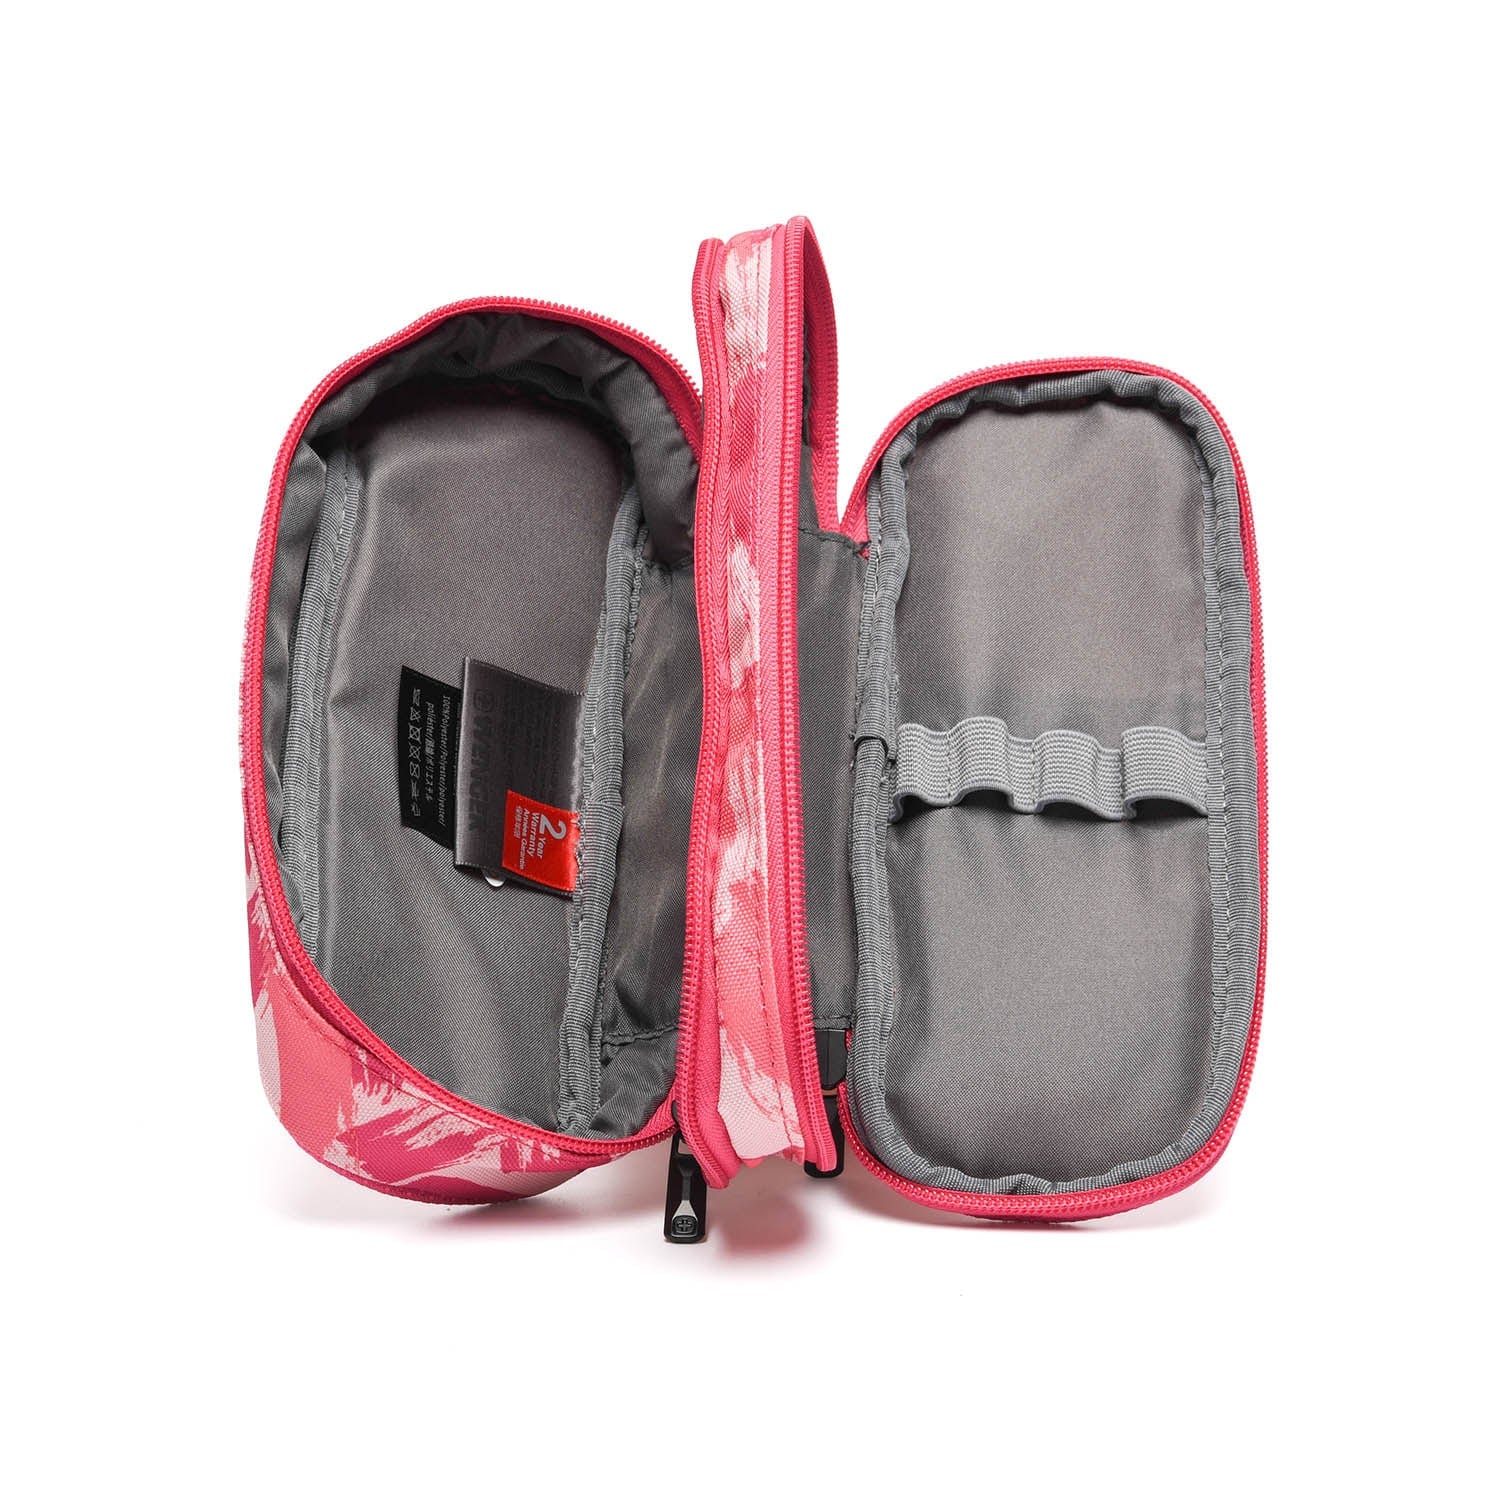 Wenger Two-Compartment School Pencil Case Pink School 653114